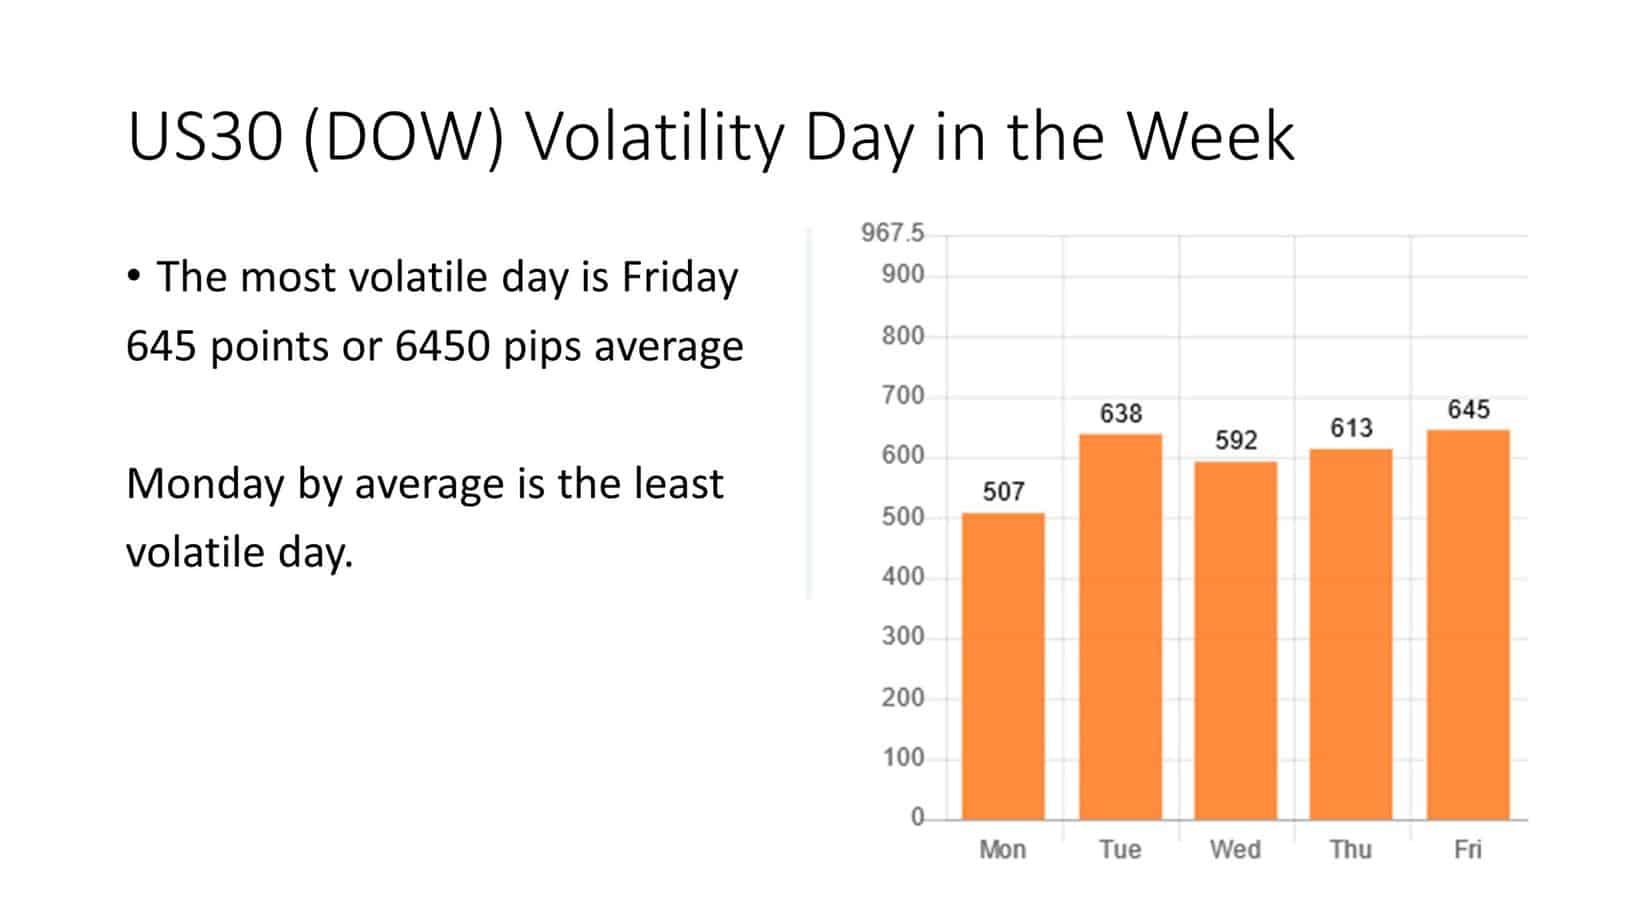 dow us30 volatility per day in the week